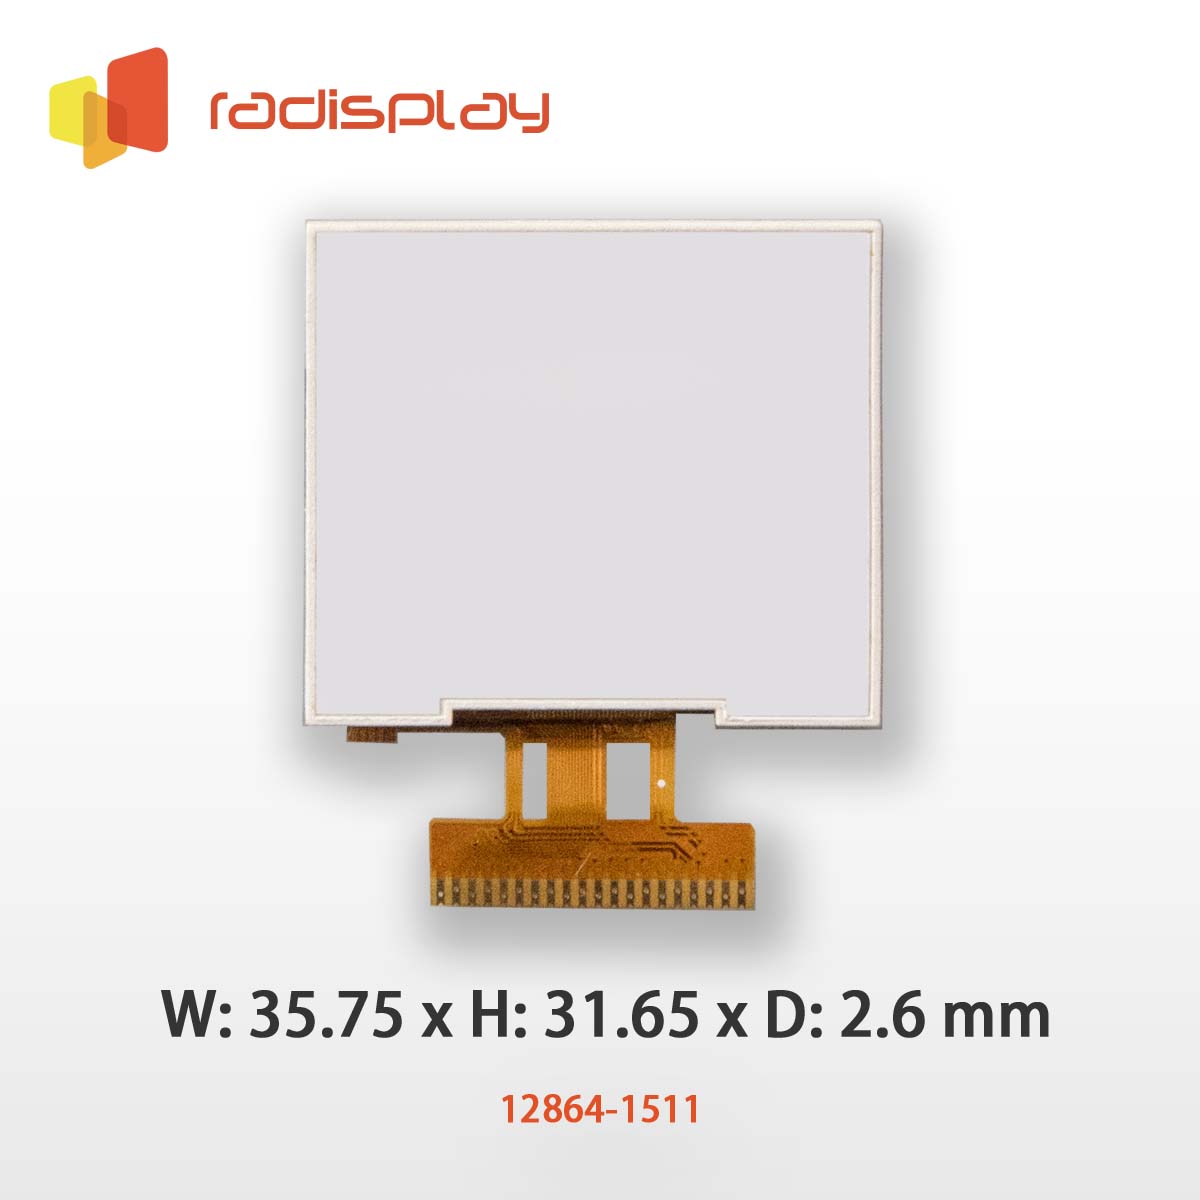 128x64 Graphic LCD (Chip on Glass) (RC12864-1511)